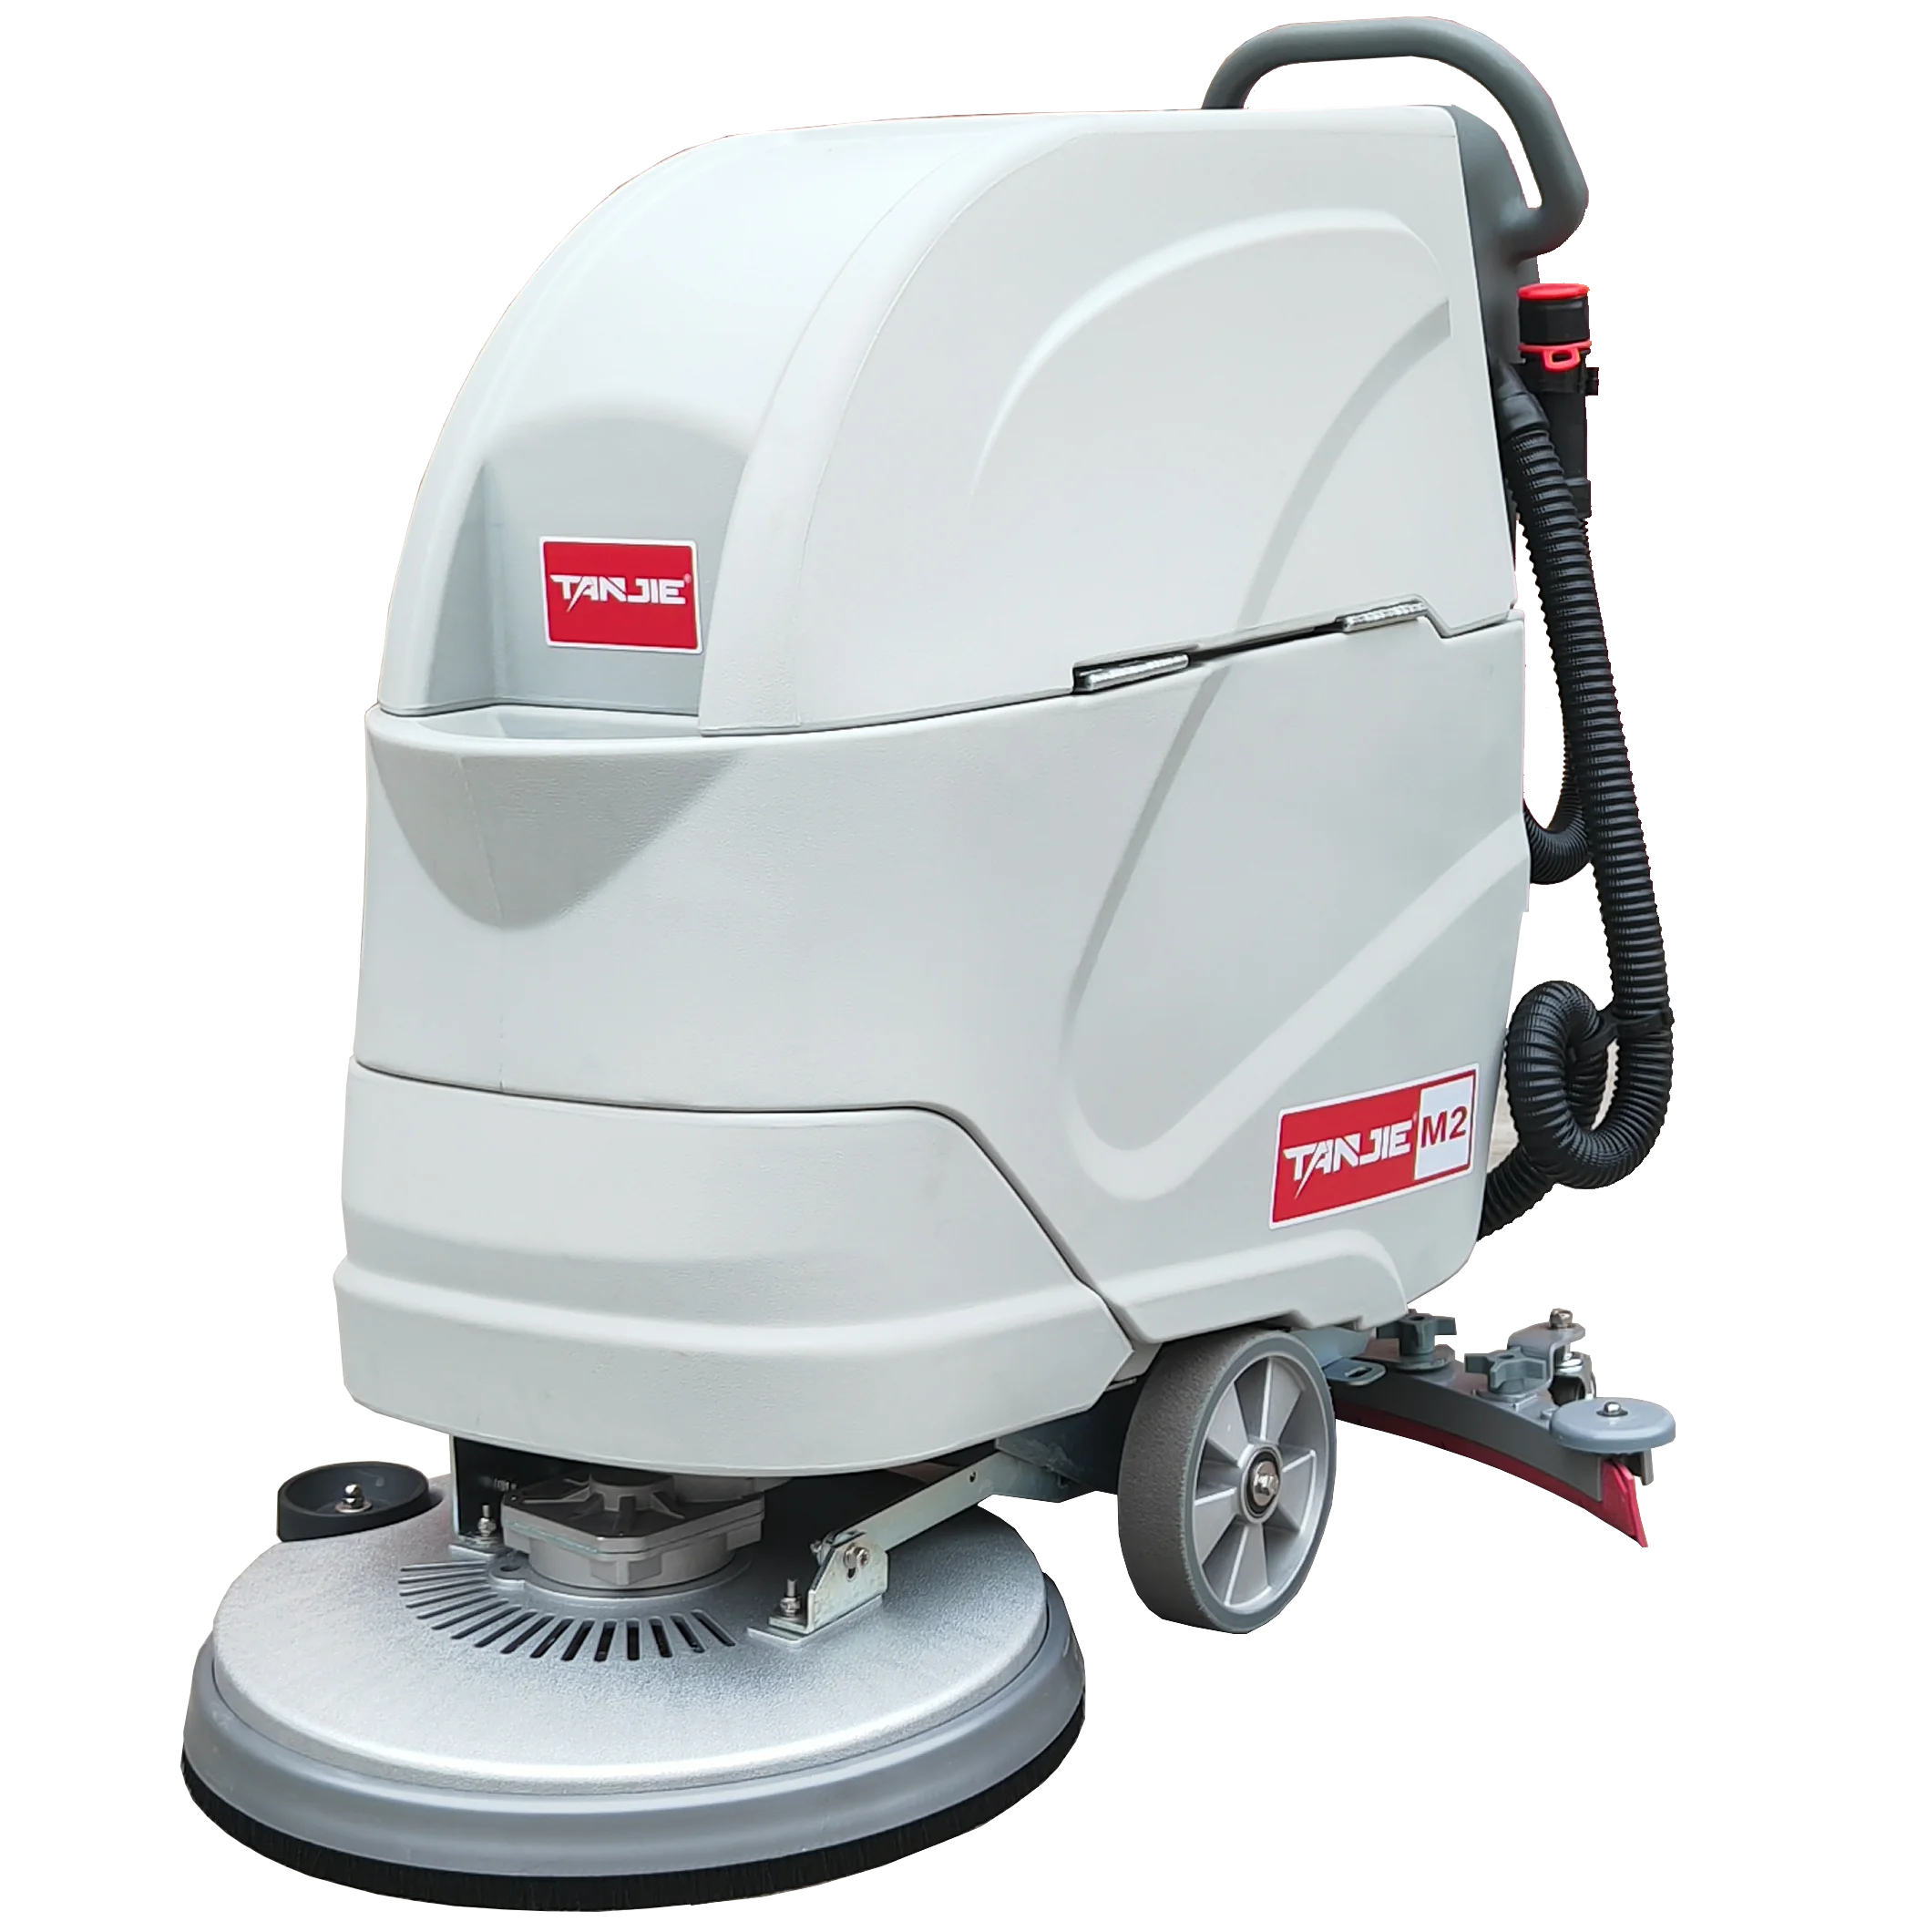 Commercial Floor Cleaner Machine Sweeper Battery Powered Floor Scrubber Dryer 21 inch brush 31 inch Squeegee Width 55 L Tank (1600550784292)